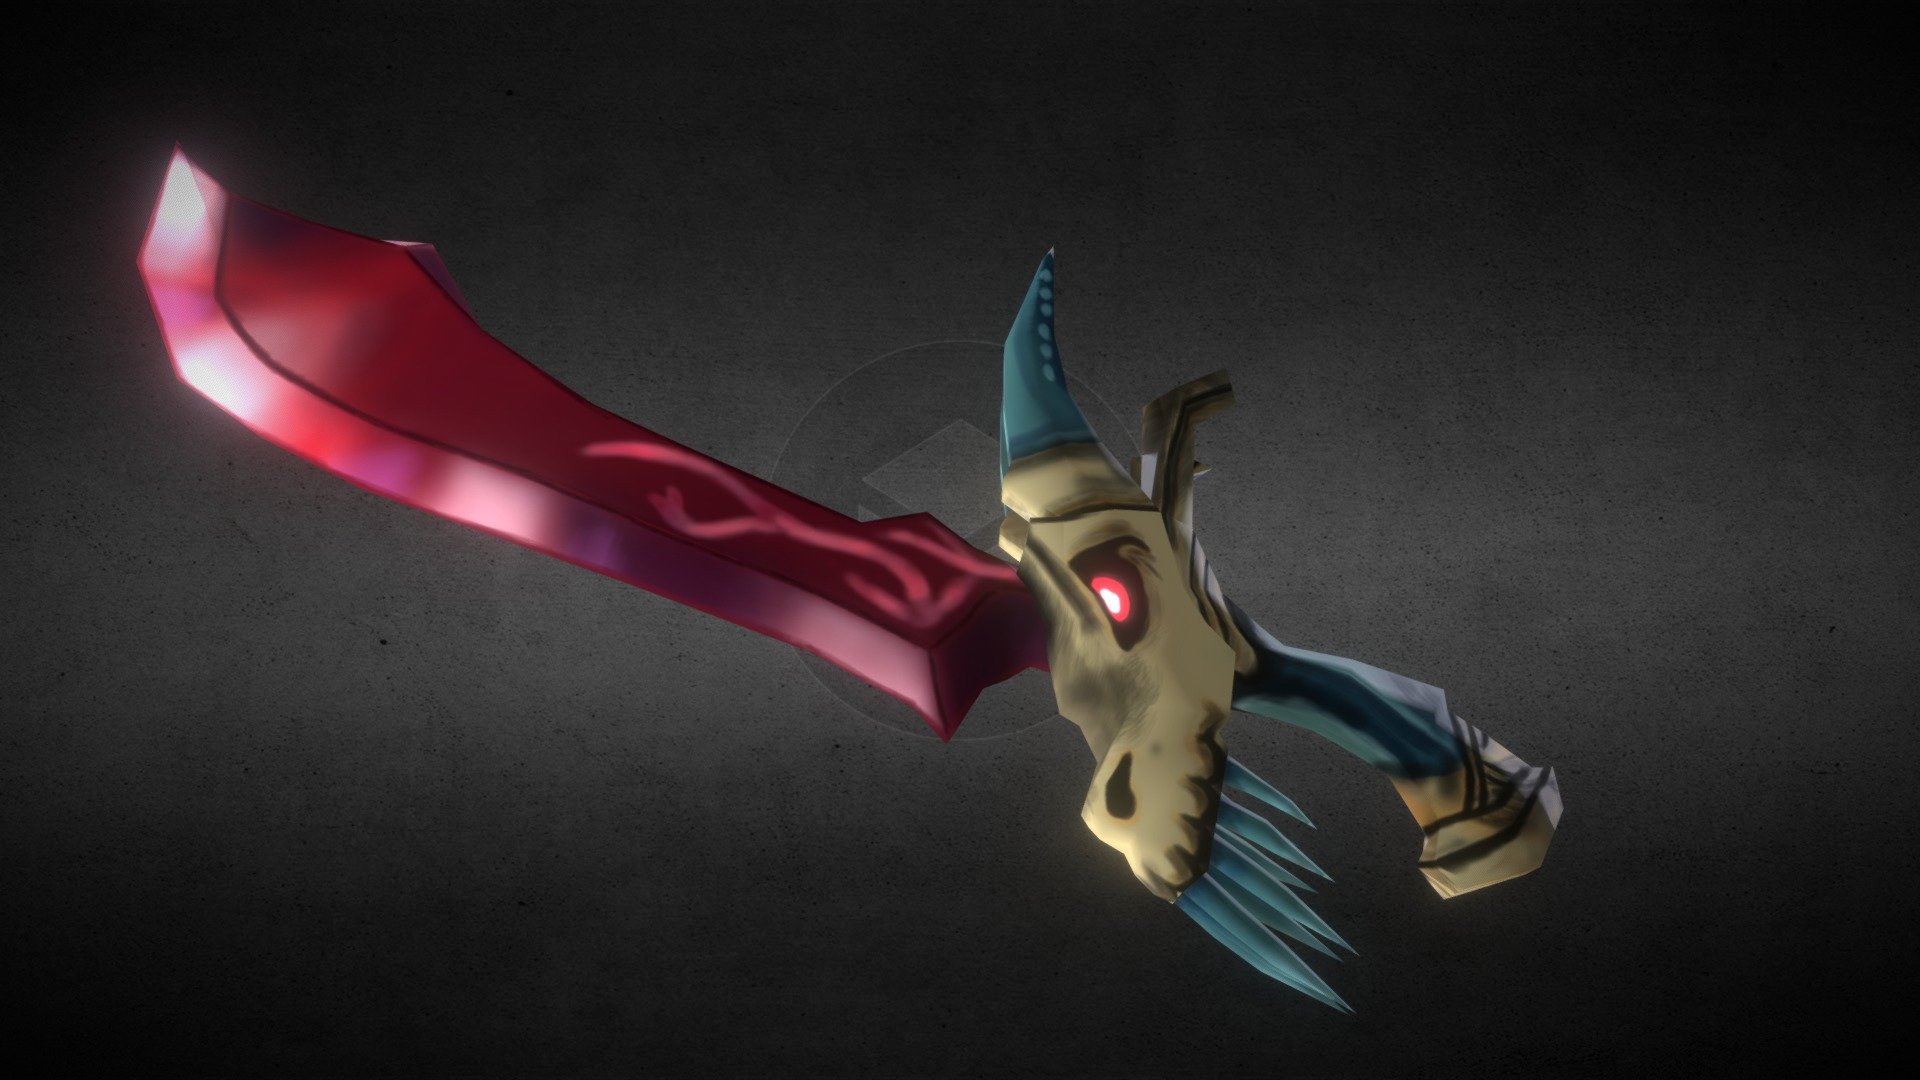 A stylized handpainted dragon sword inspired by medieval and fantasy artworks made with 3DS Max ready for a Game Engine 
I included the .Max .FBX .OBJ the textures are .PNG and include the Diffuse and Emissive map

If you need 3d game assets or stl files I can do commission works 3d model